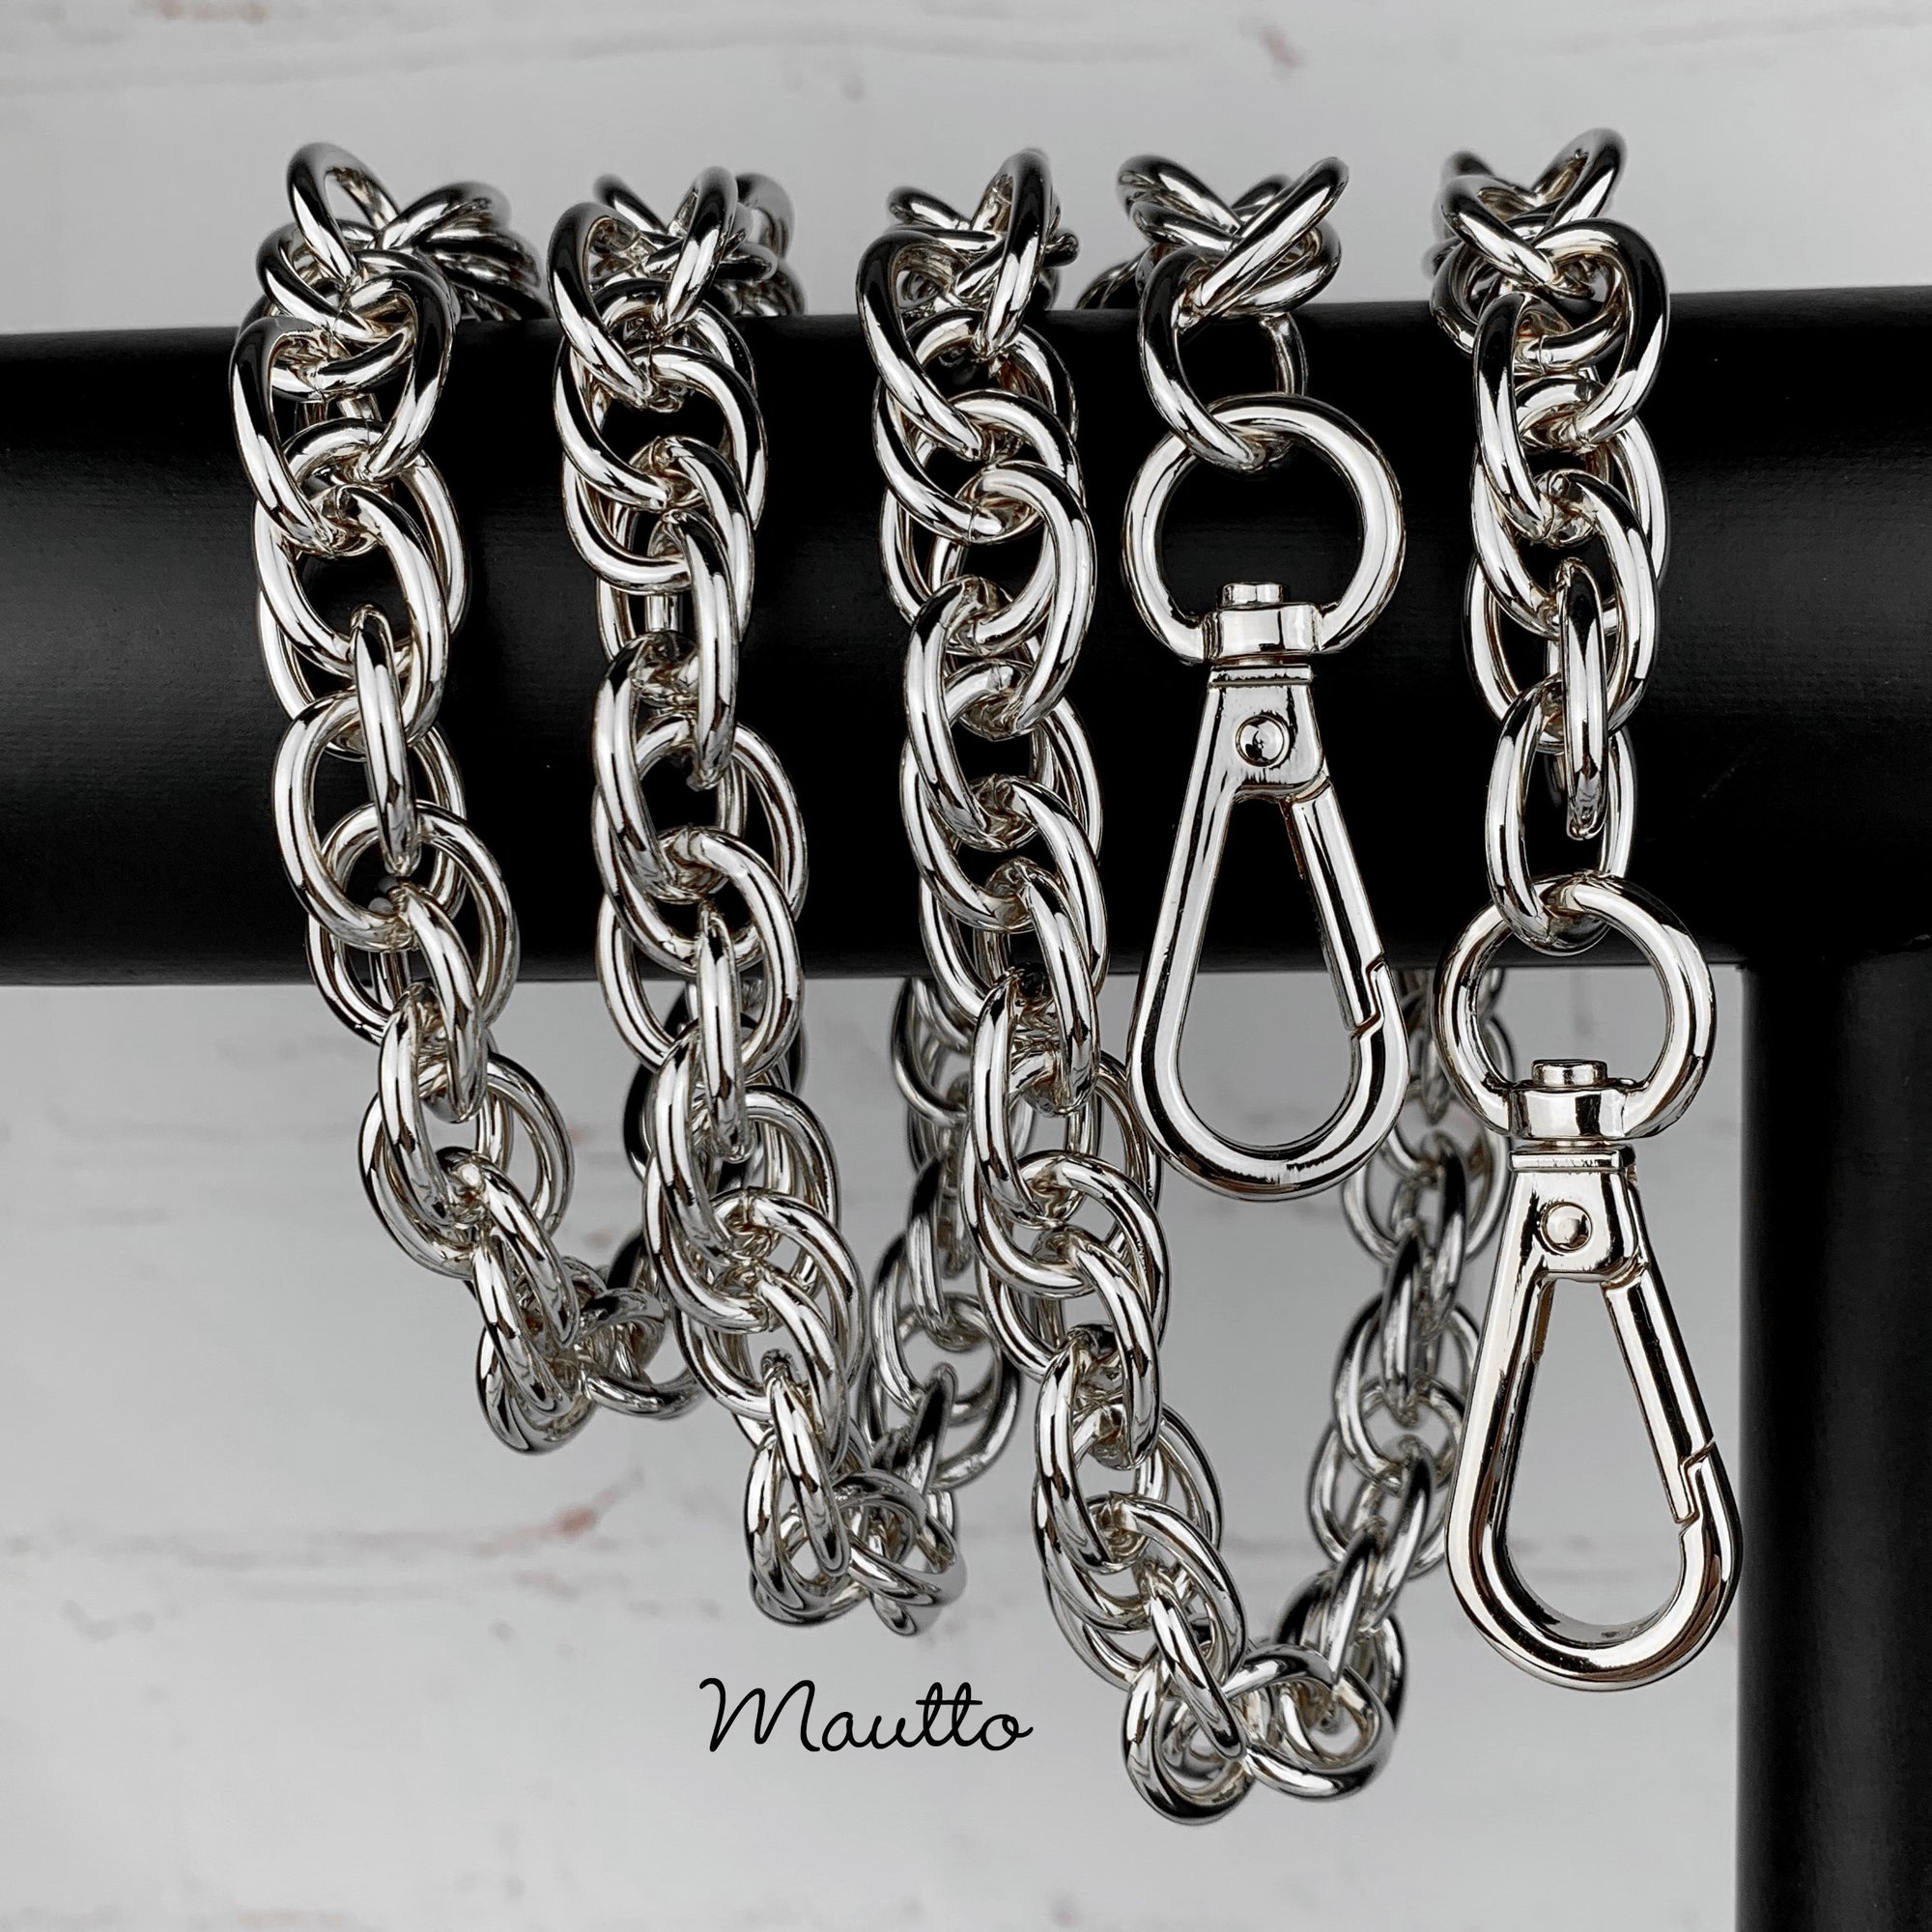 Luxury Chain Wrist Strap - Choose Chain Size and Clip Style Large / Silver-Tone / #14b